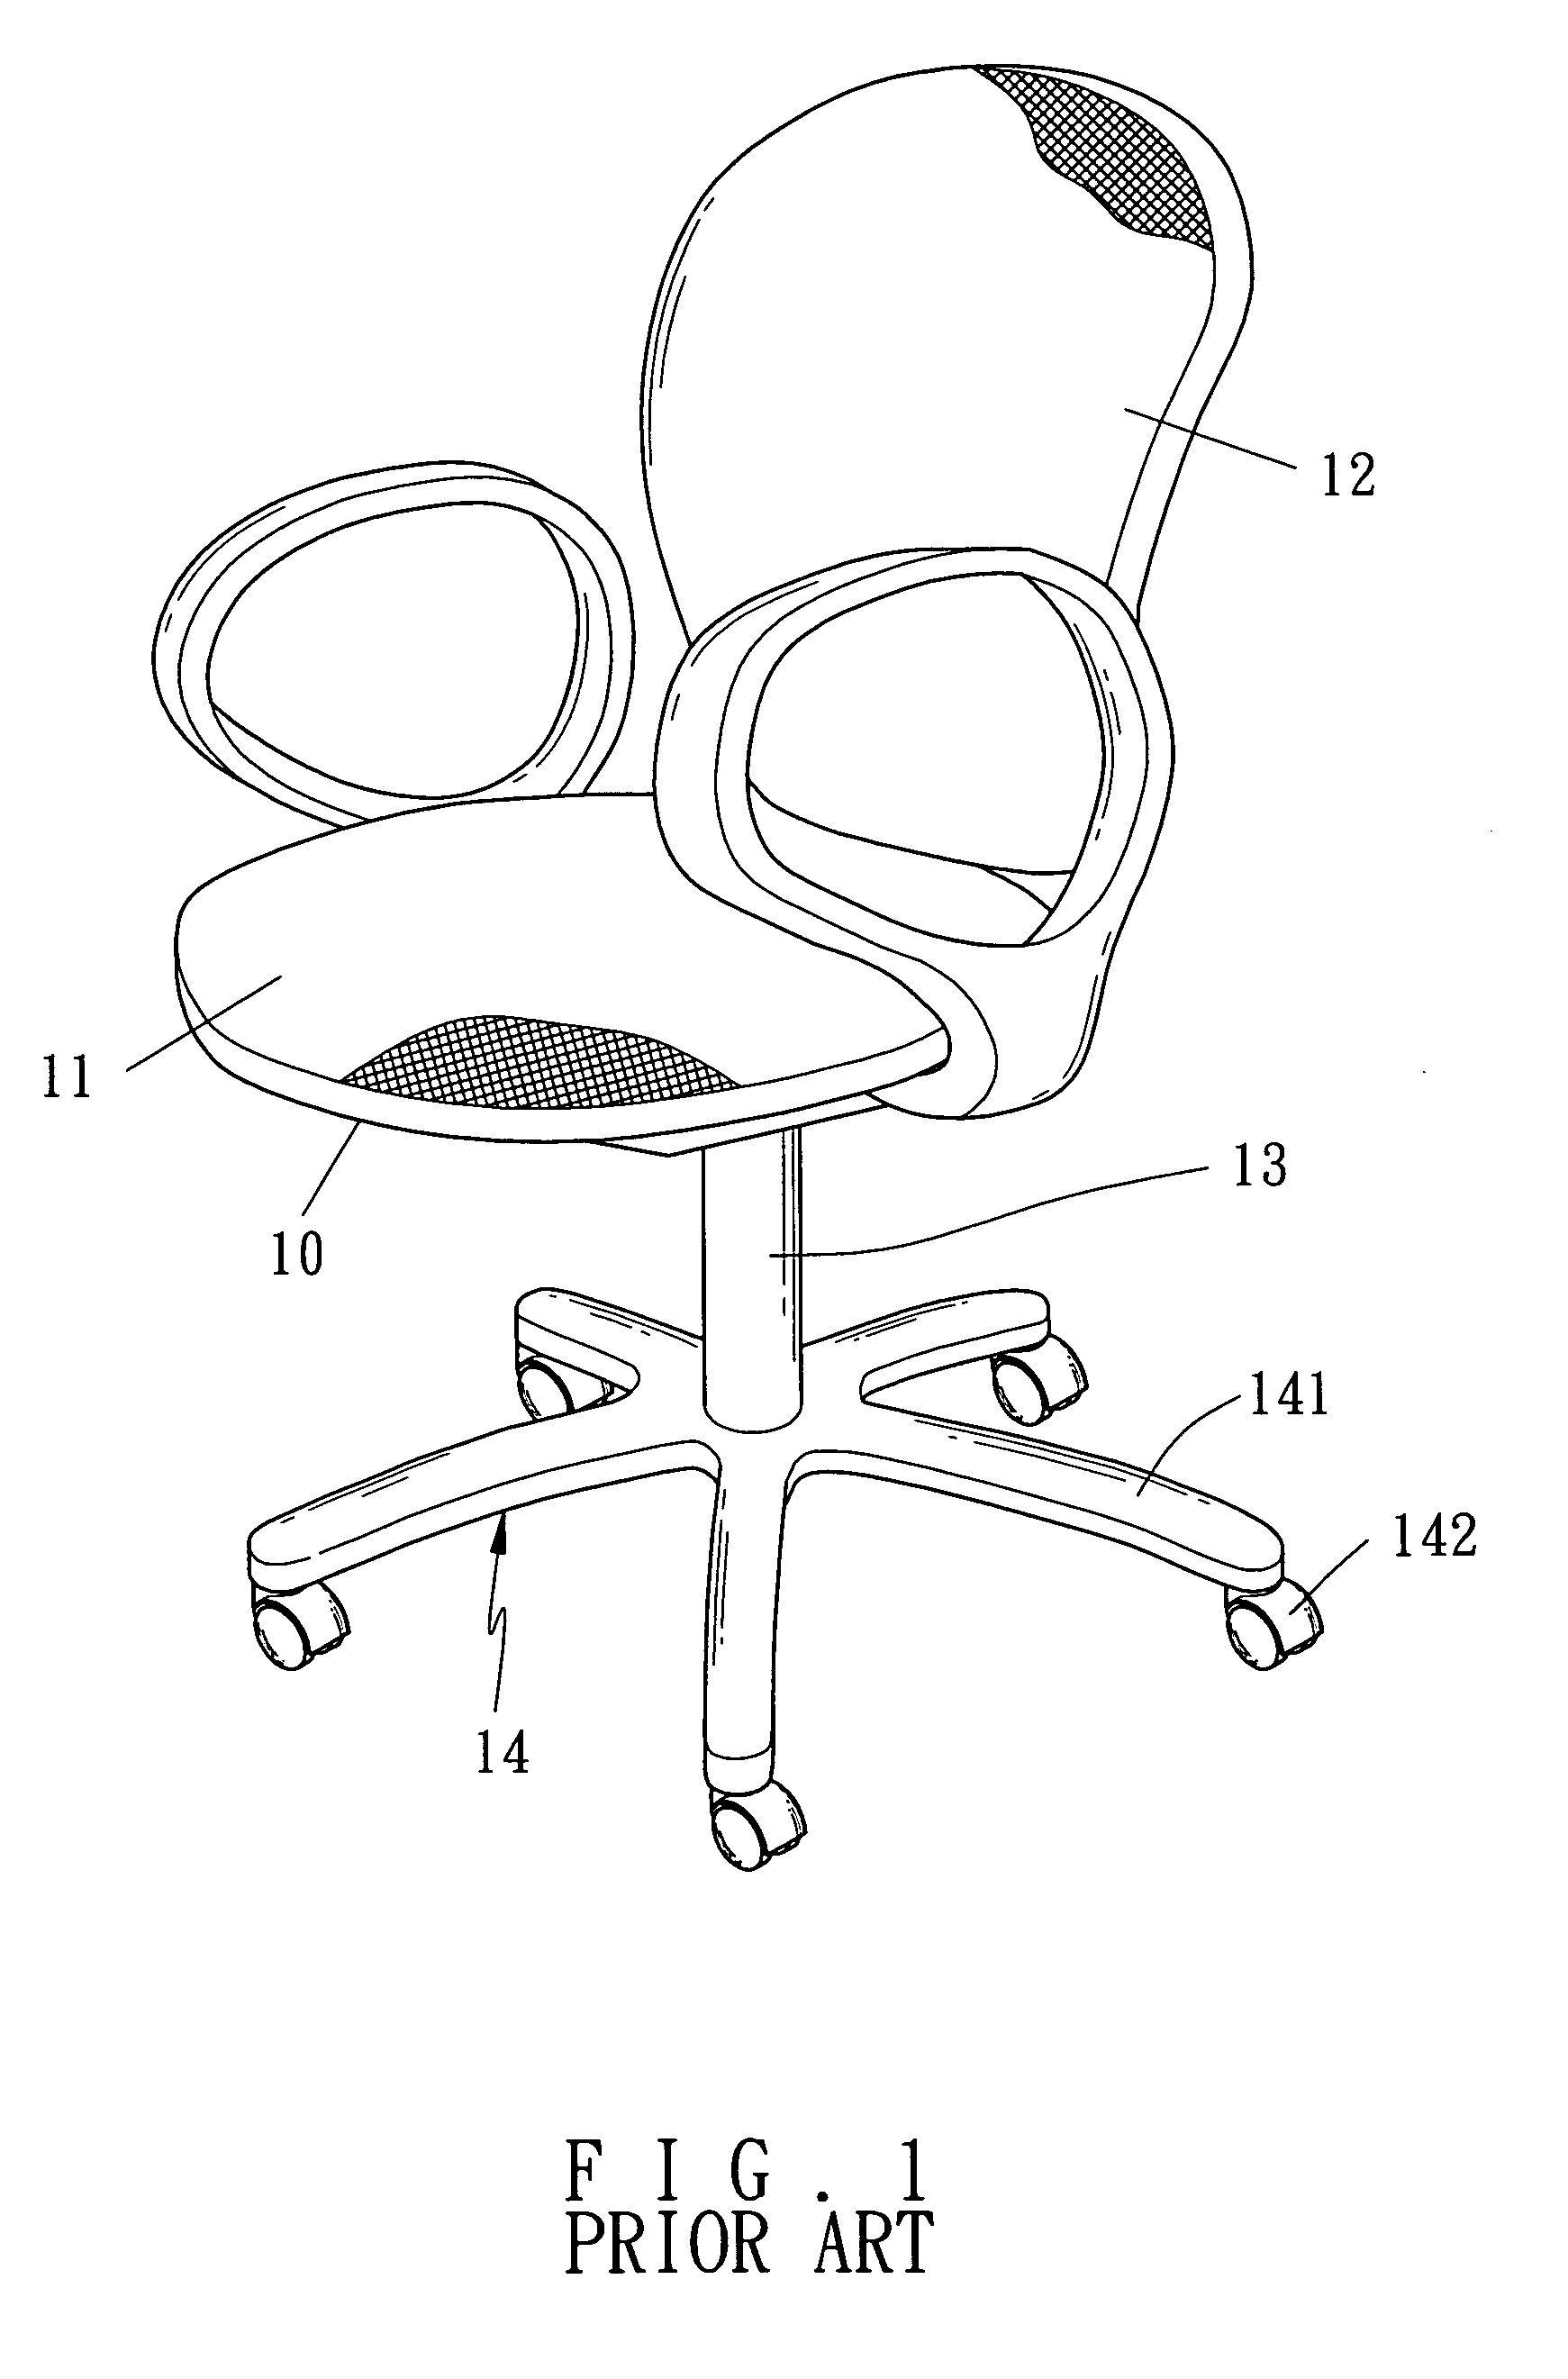 Leg structure of office chair